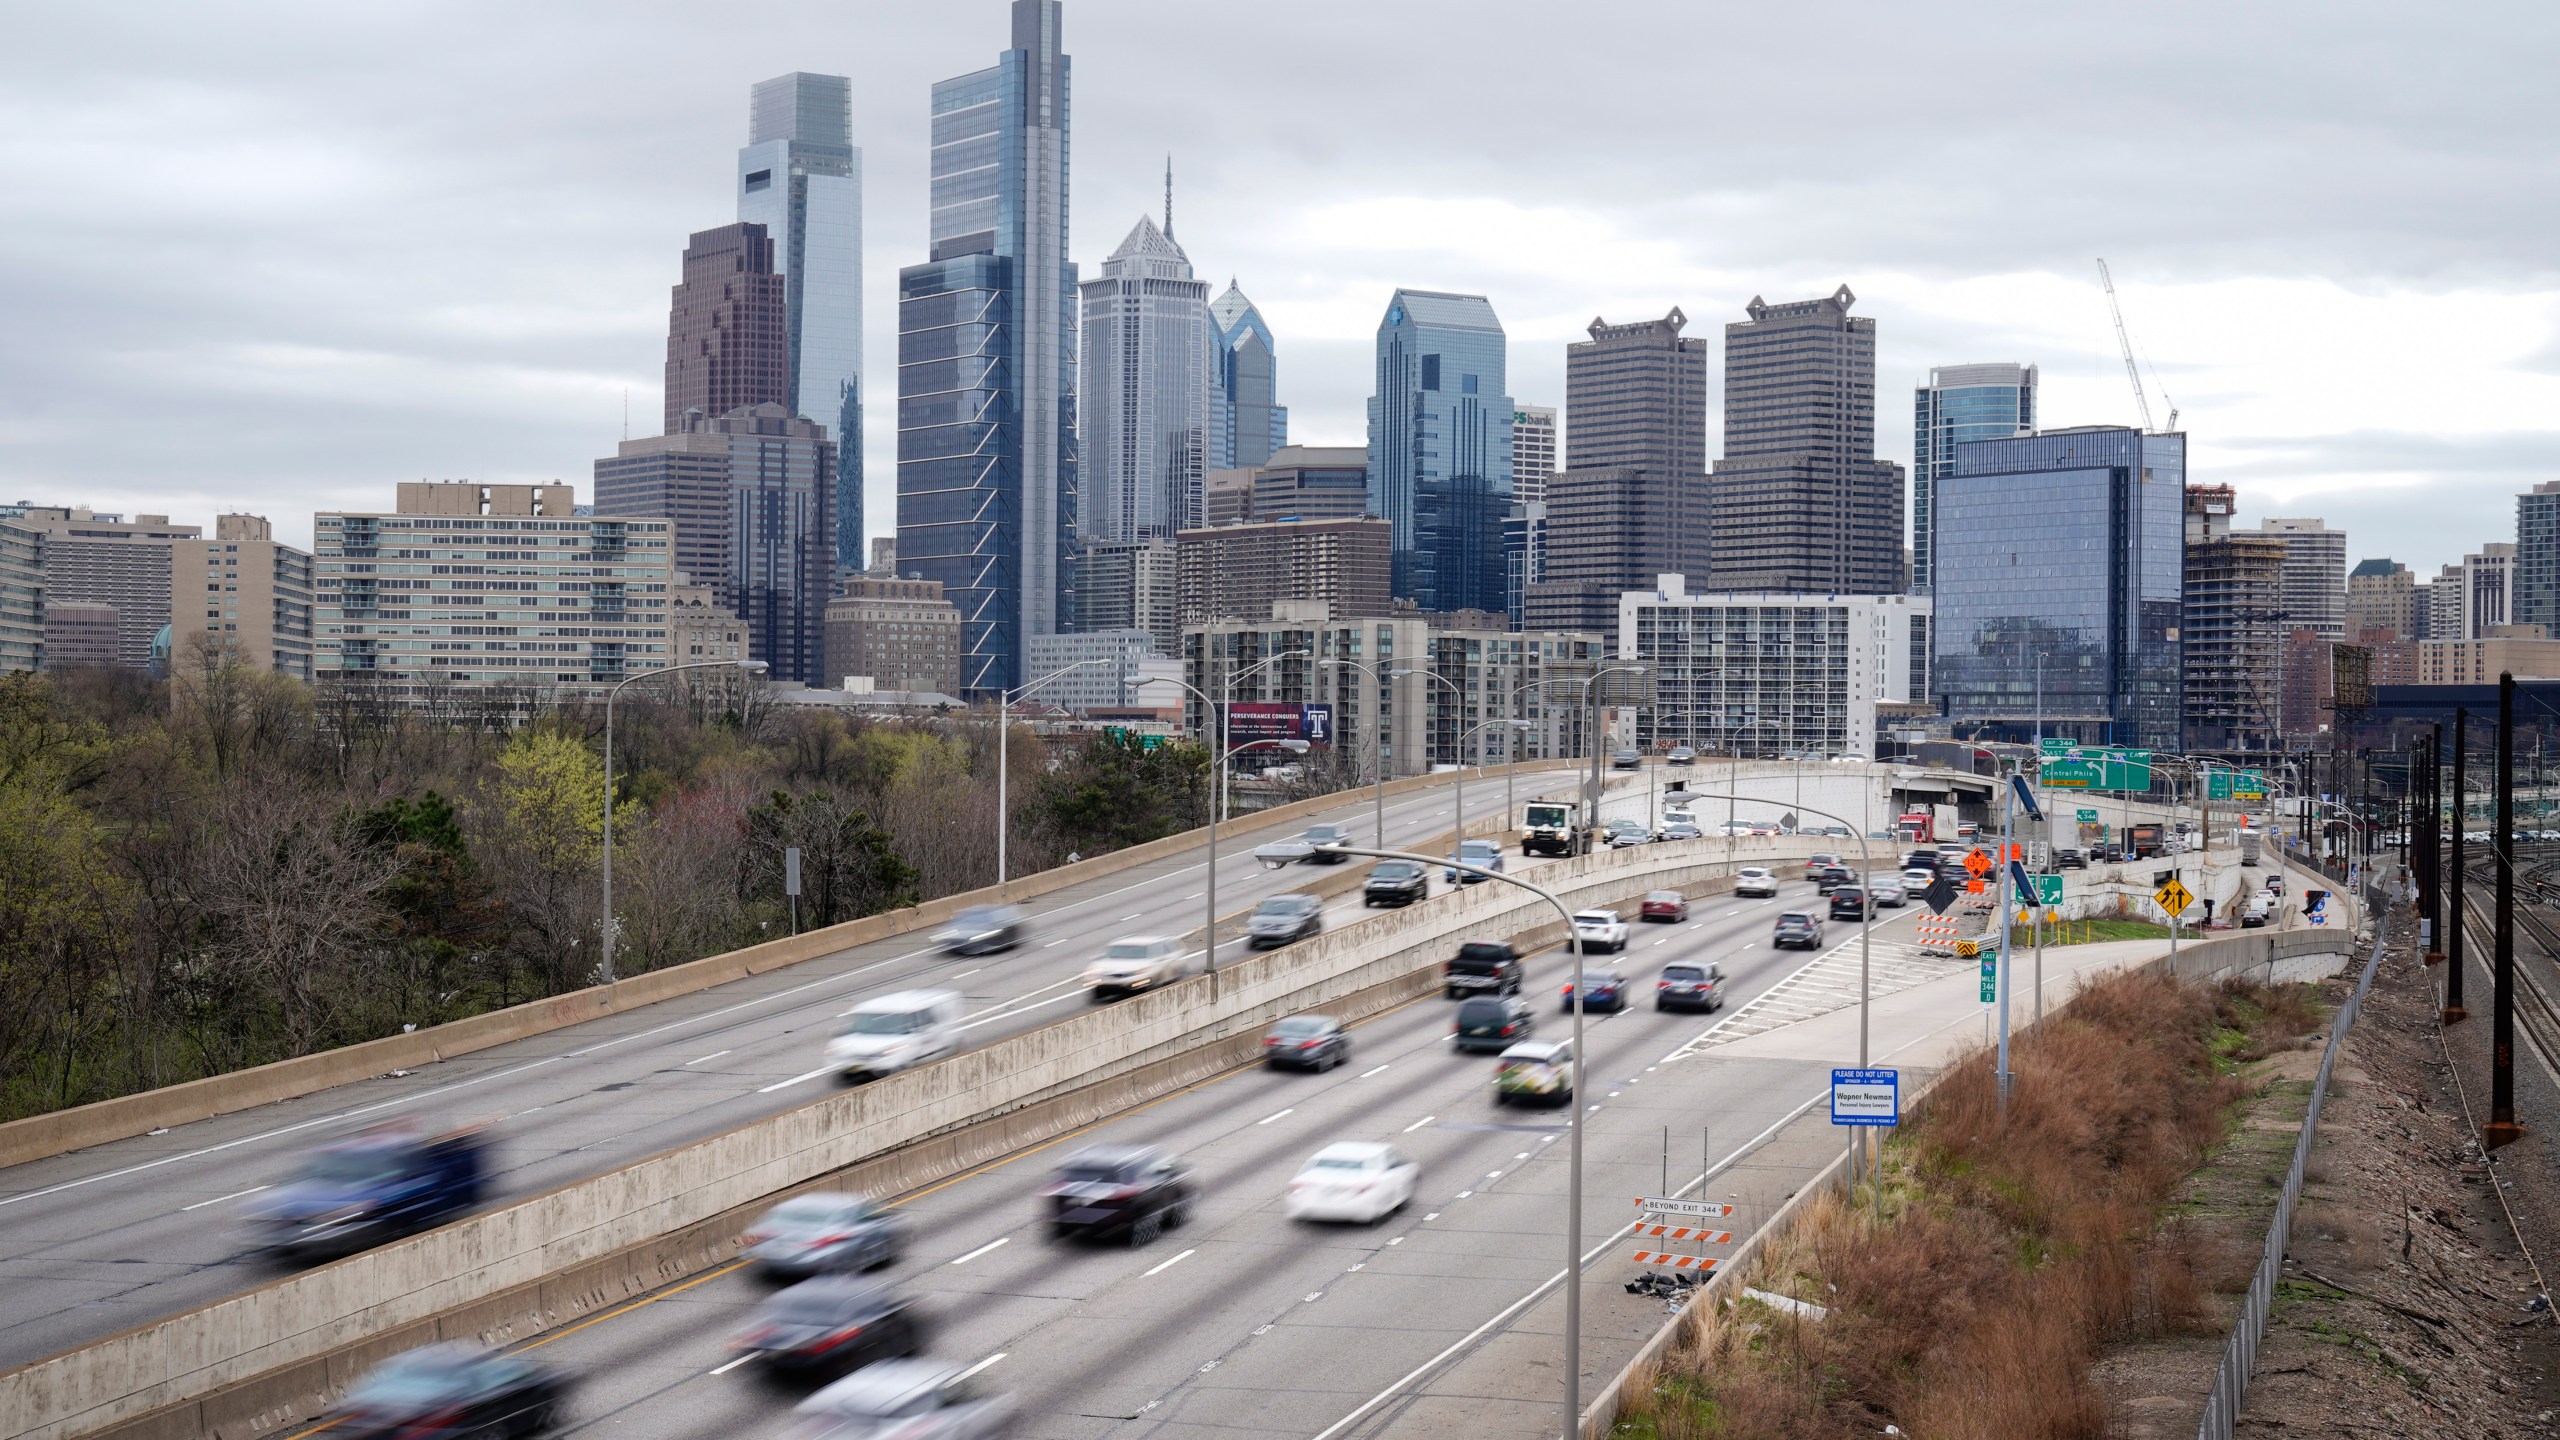 FILE - Traffic moves along the Interstate 76 highway on March 31, 2021, in Philadelphia. The number of people killed on U.S. roadways decreased slightly in 2022, but government officials said the 42,795 people who died is still a national crisis. (AP Photo/Matt Rourke, File)